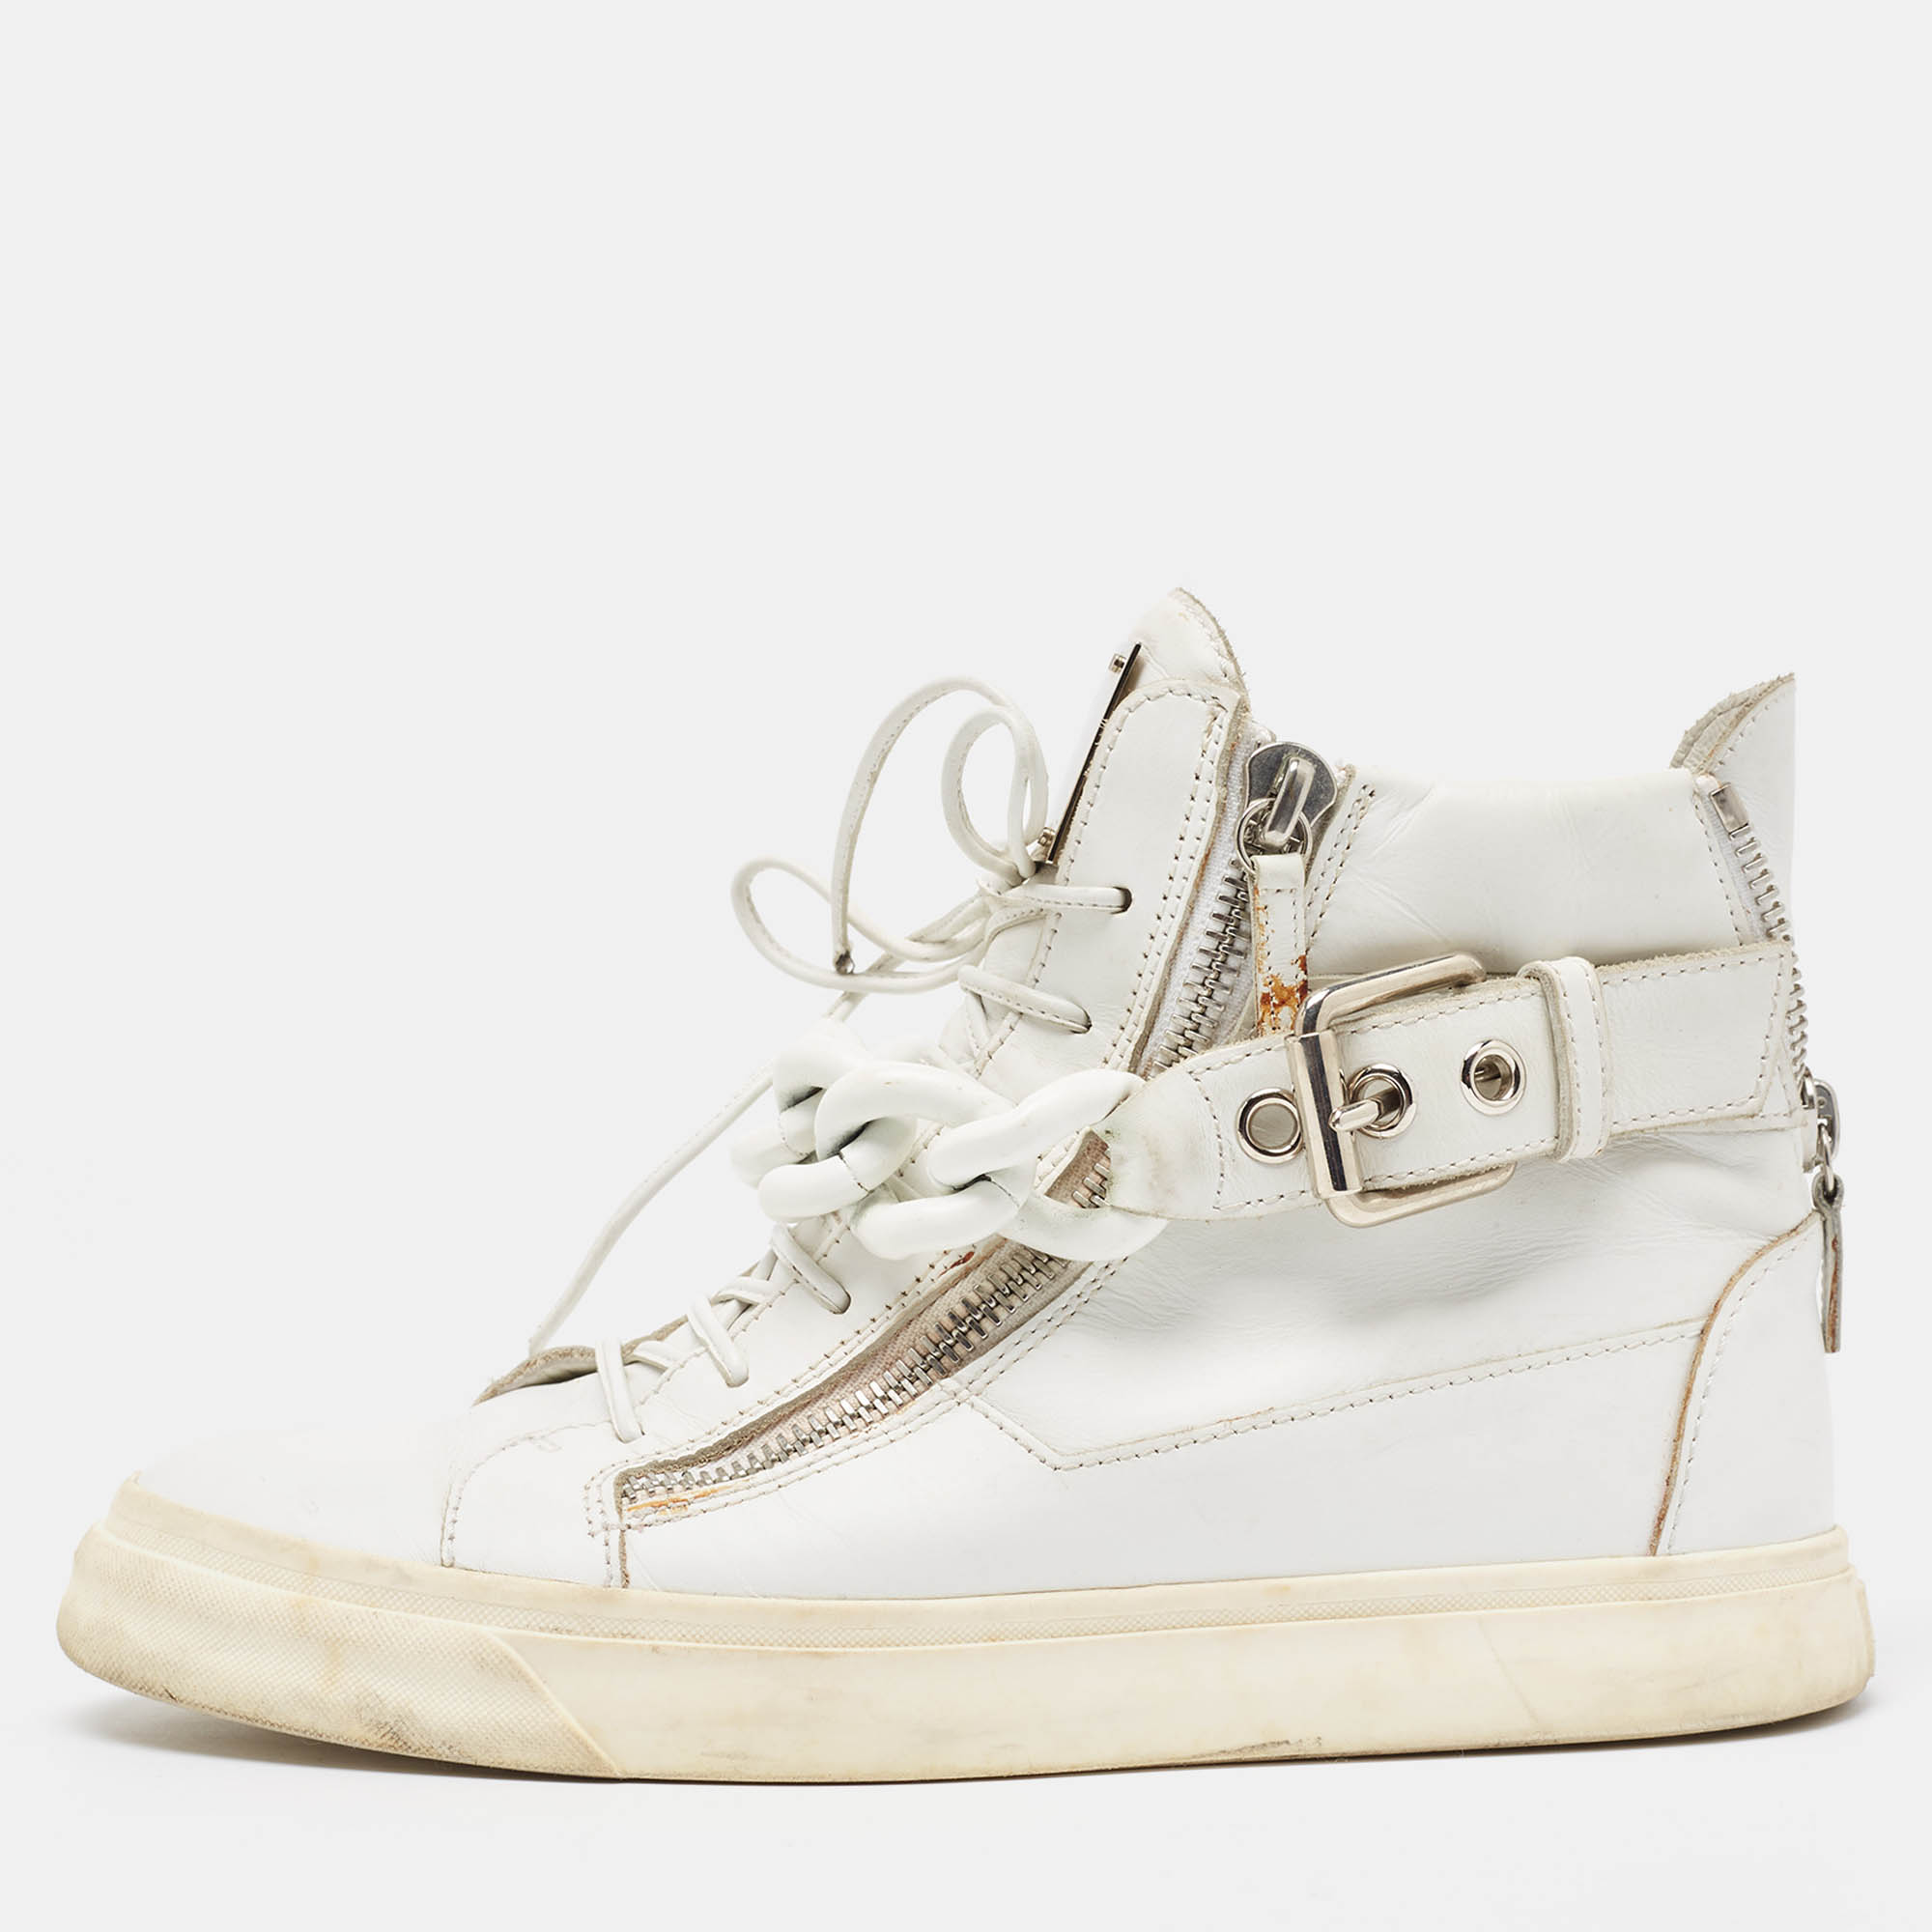 Giuseppe zanotti white leather high top sneakers size 40